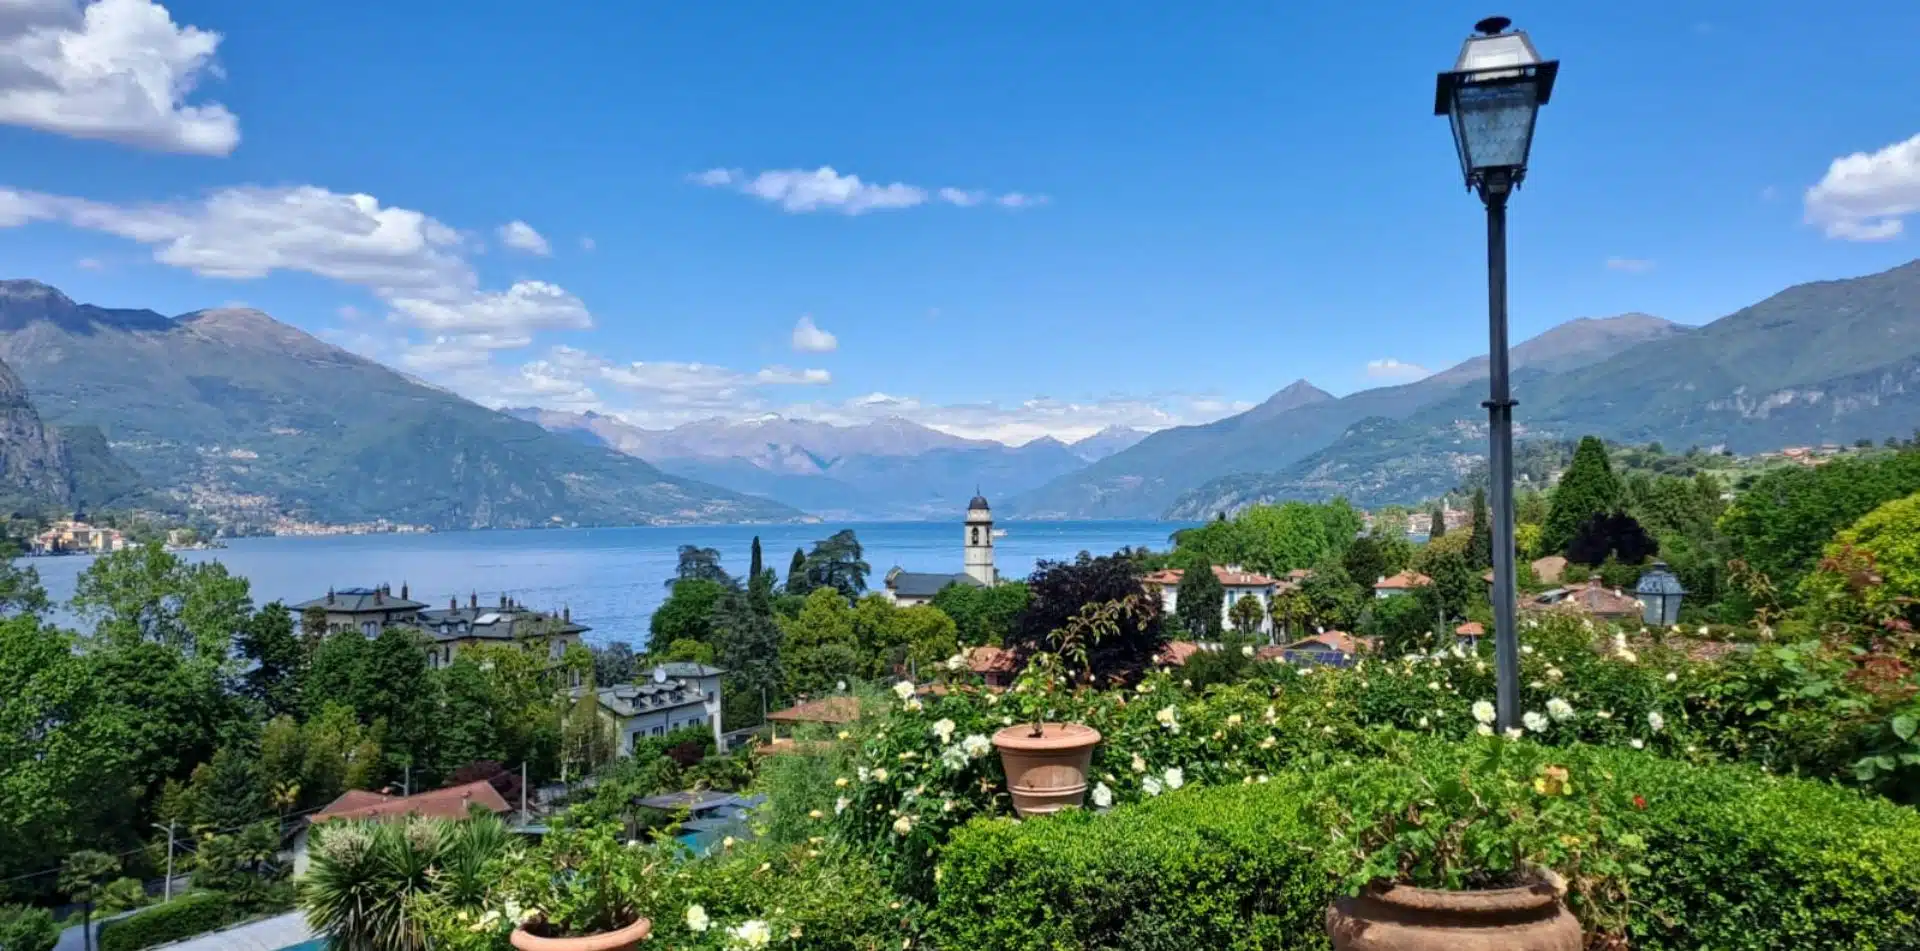 Scenic lakeside views from tour in Italy